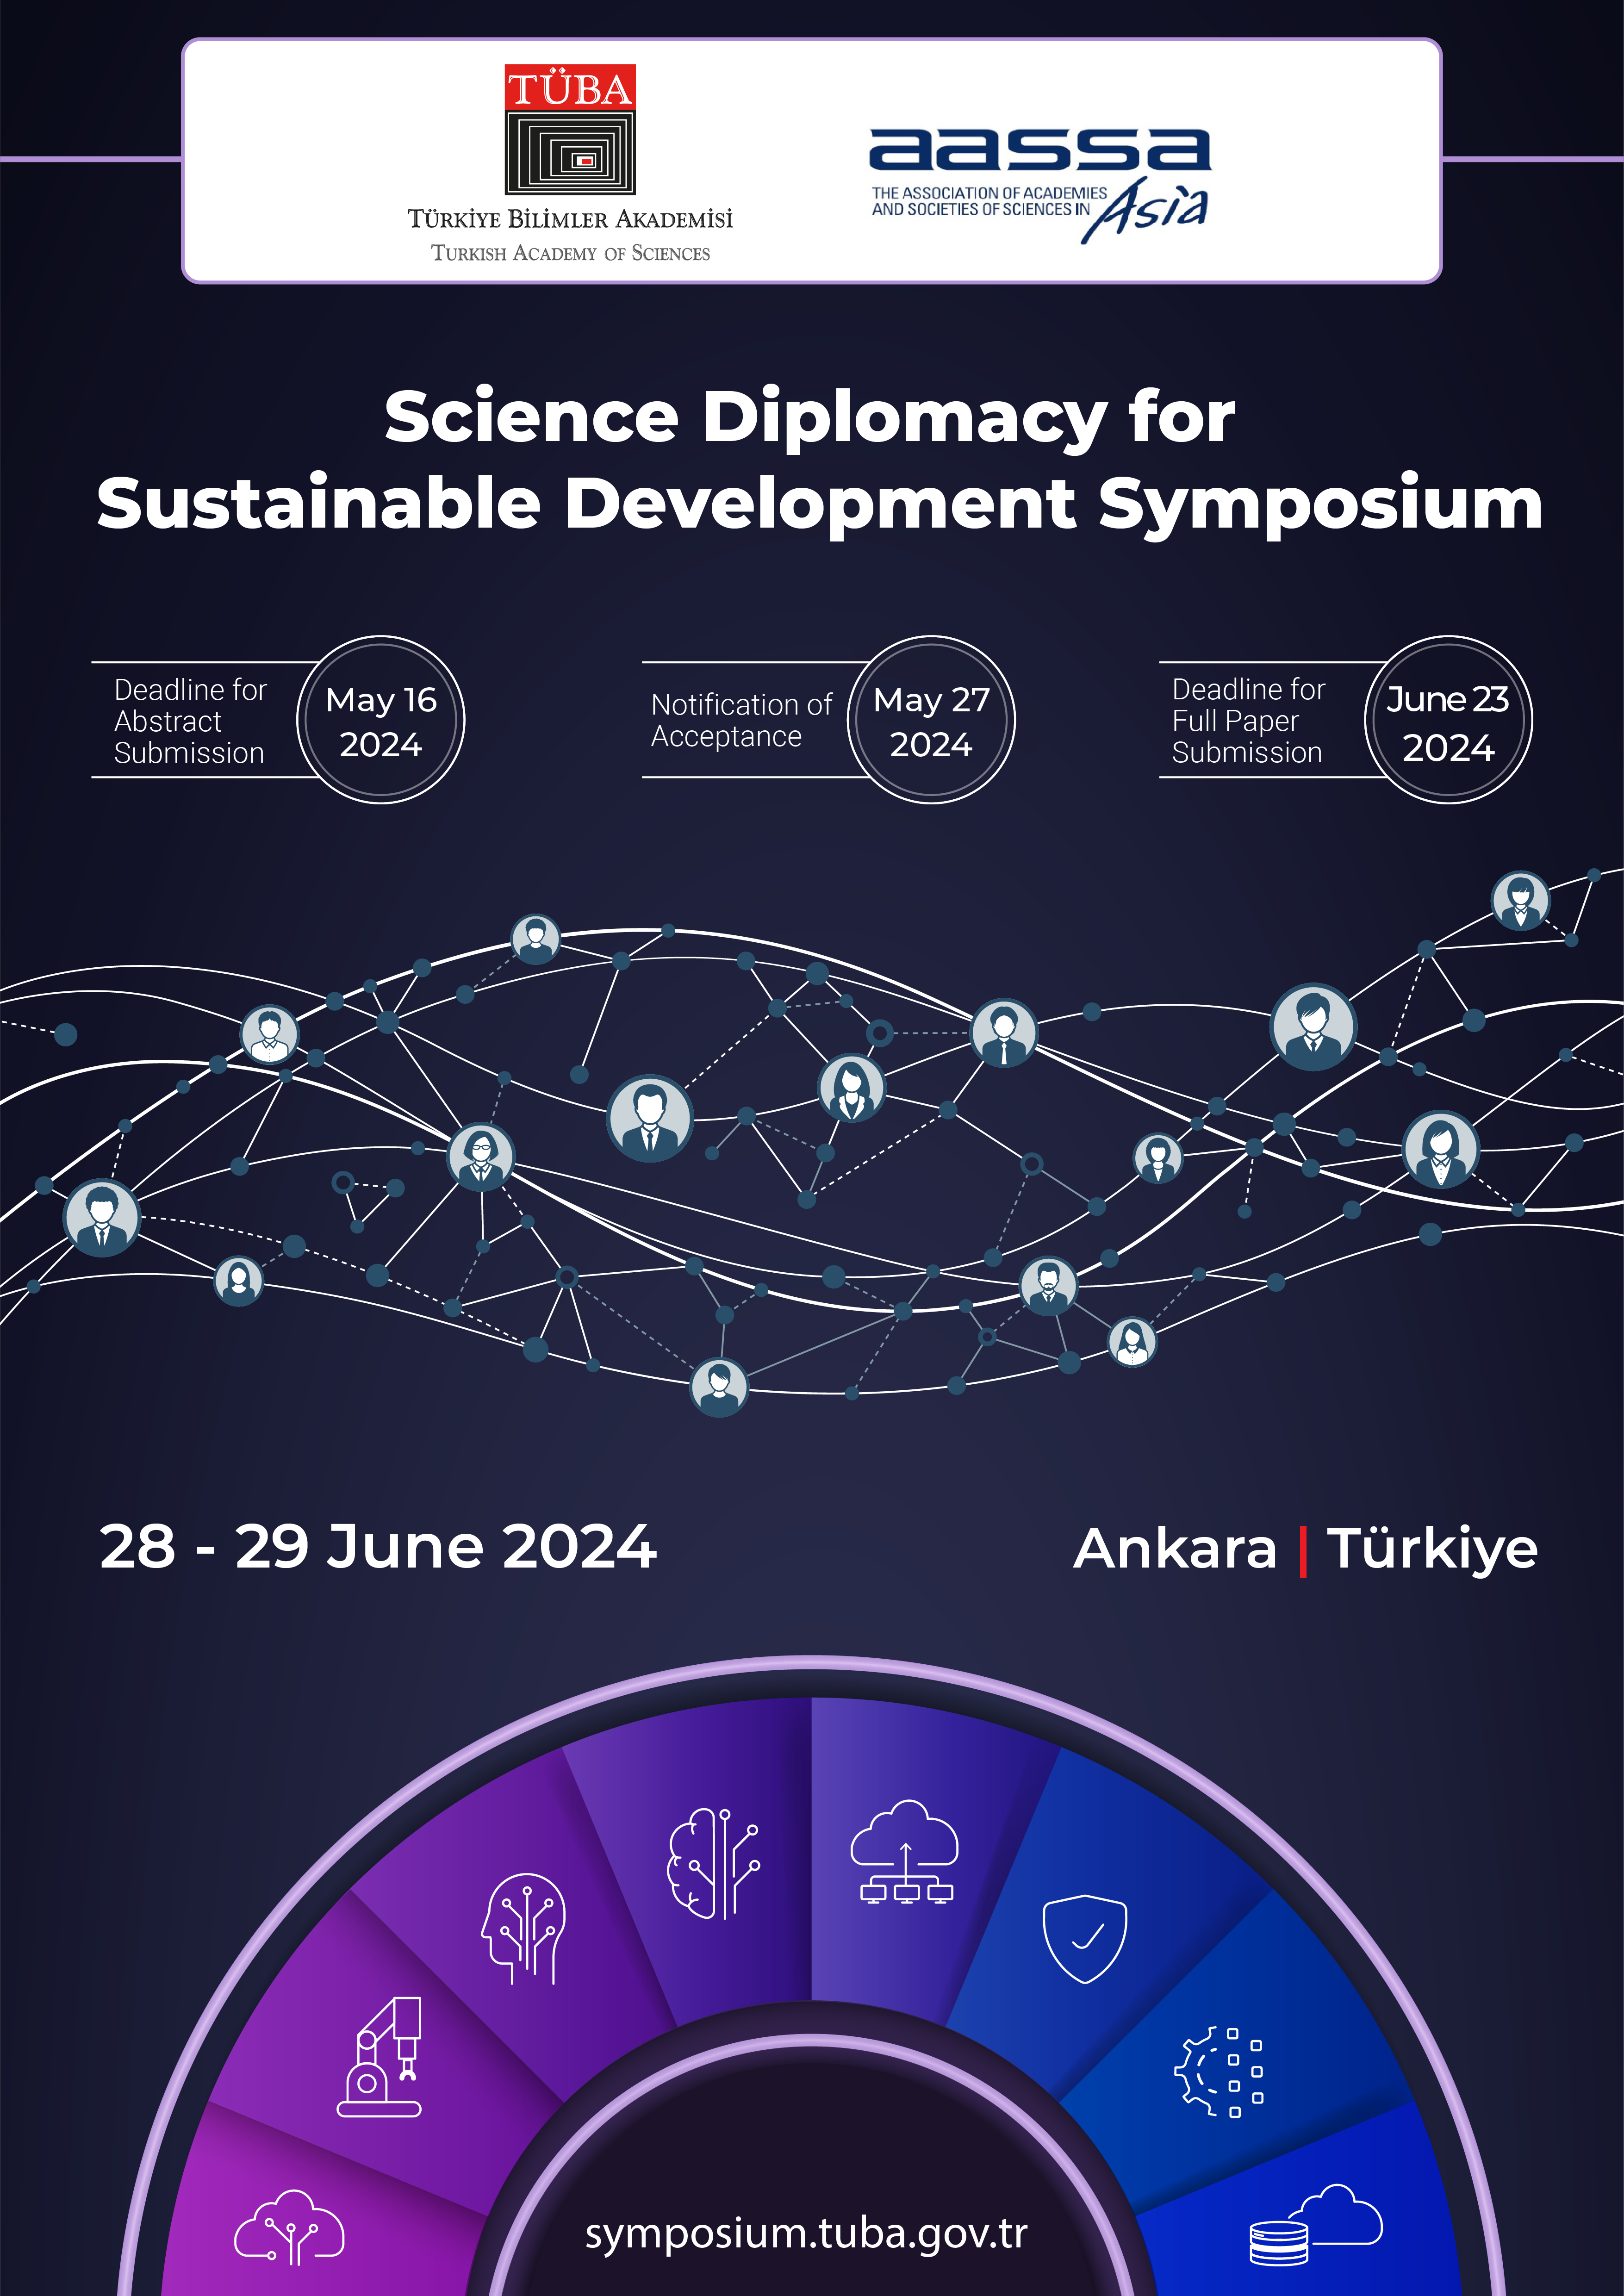 'Science Diplomacy for Sustainable Development' Symposium by TÜBA&AASSA